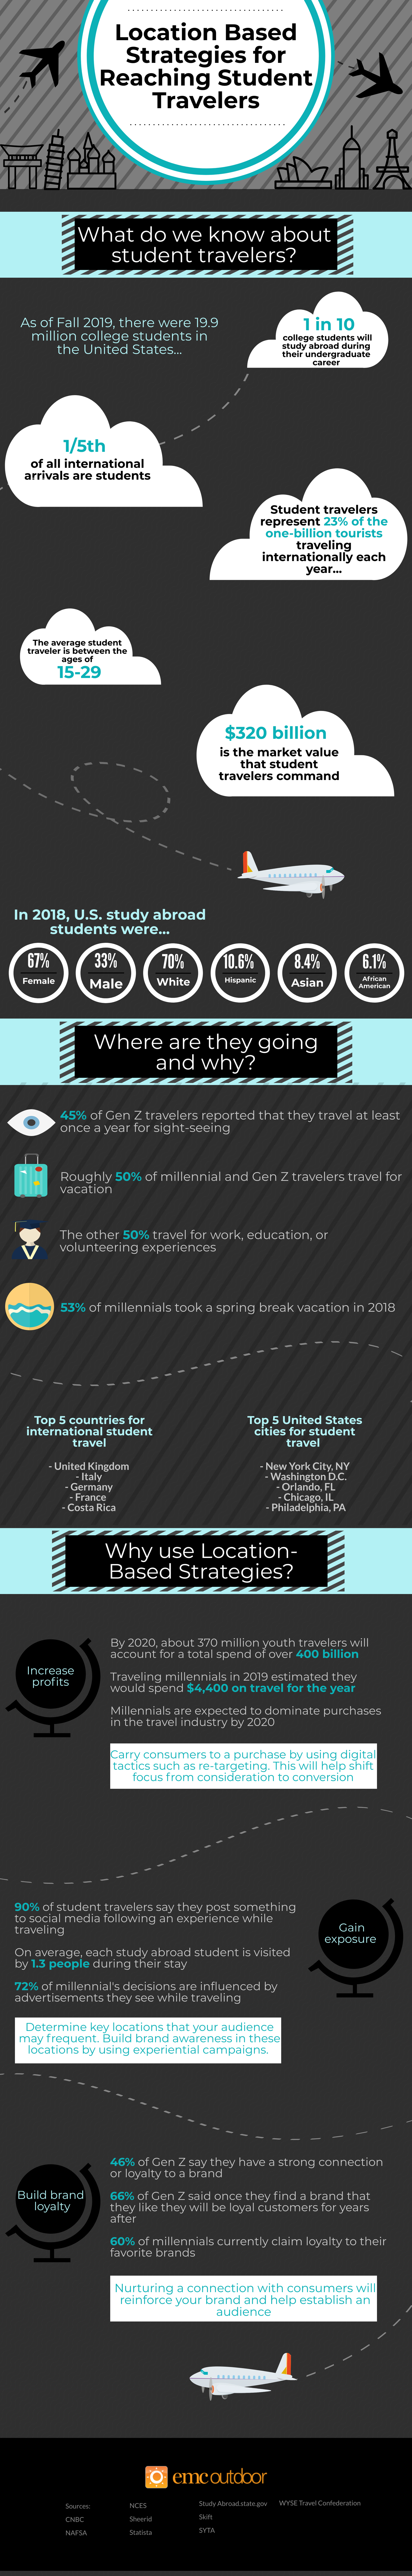 Location-Based-Strategies-to-Reach-Student-Travelers